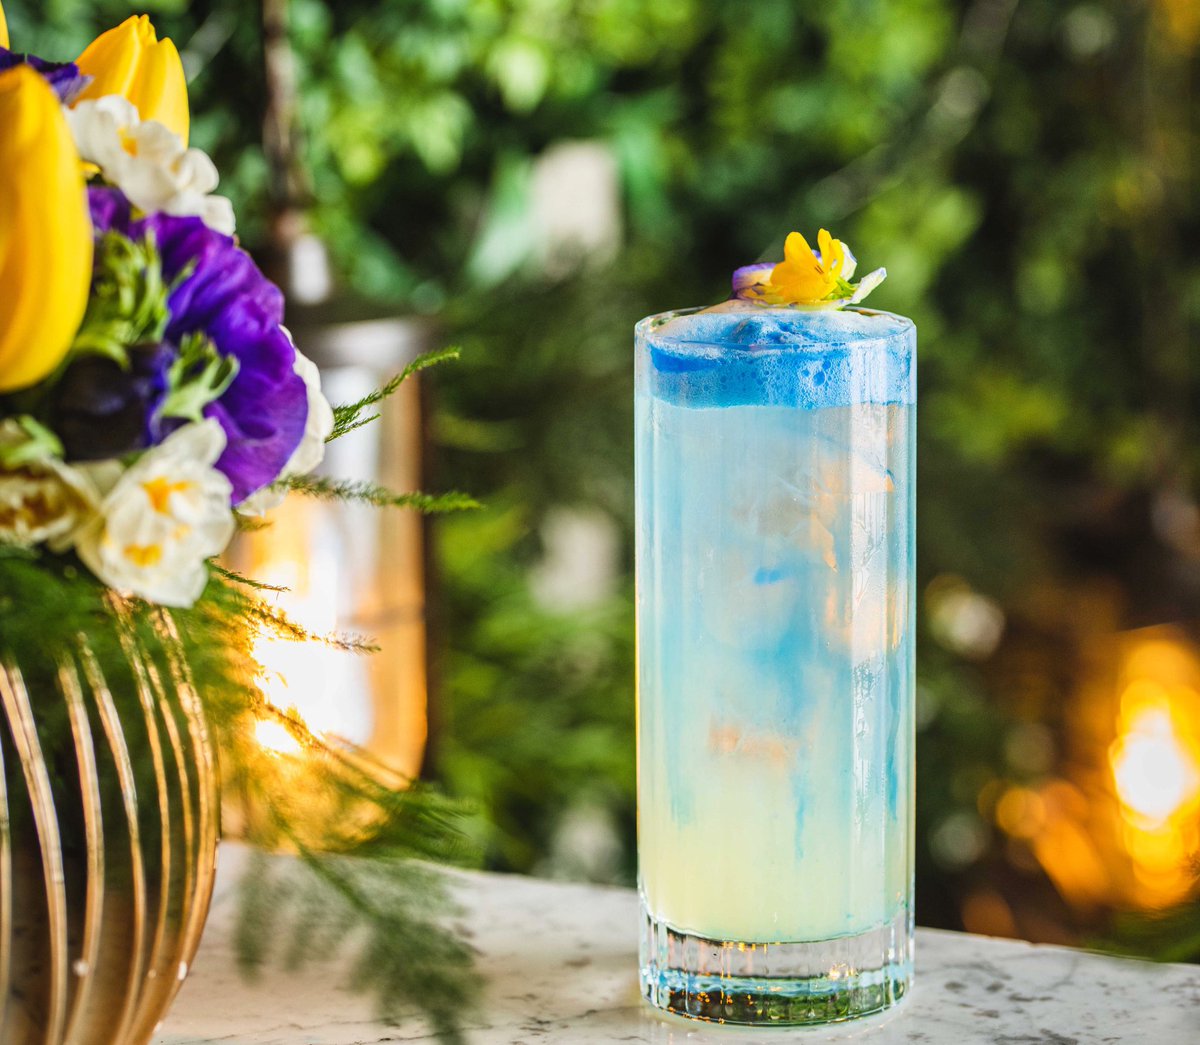 Happy Mother’s Day! 💐 Join us for a ‘Blooming Brilliant’ cocktail on our idyllic Garden Terrace to celebrate. 🍸